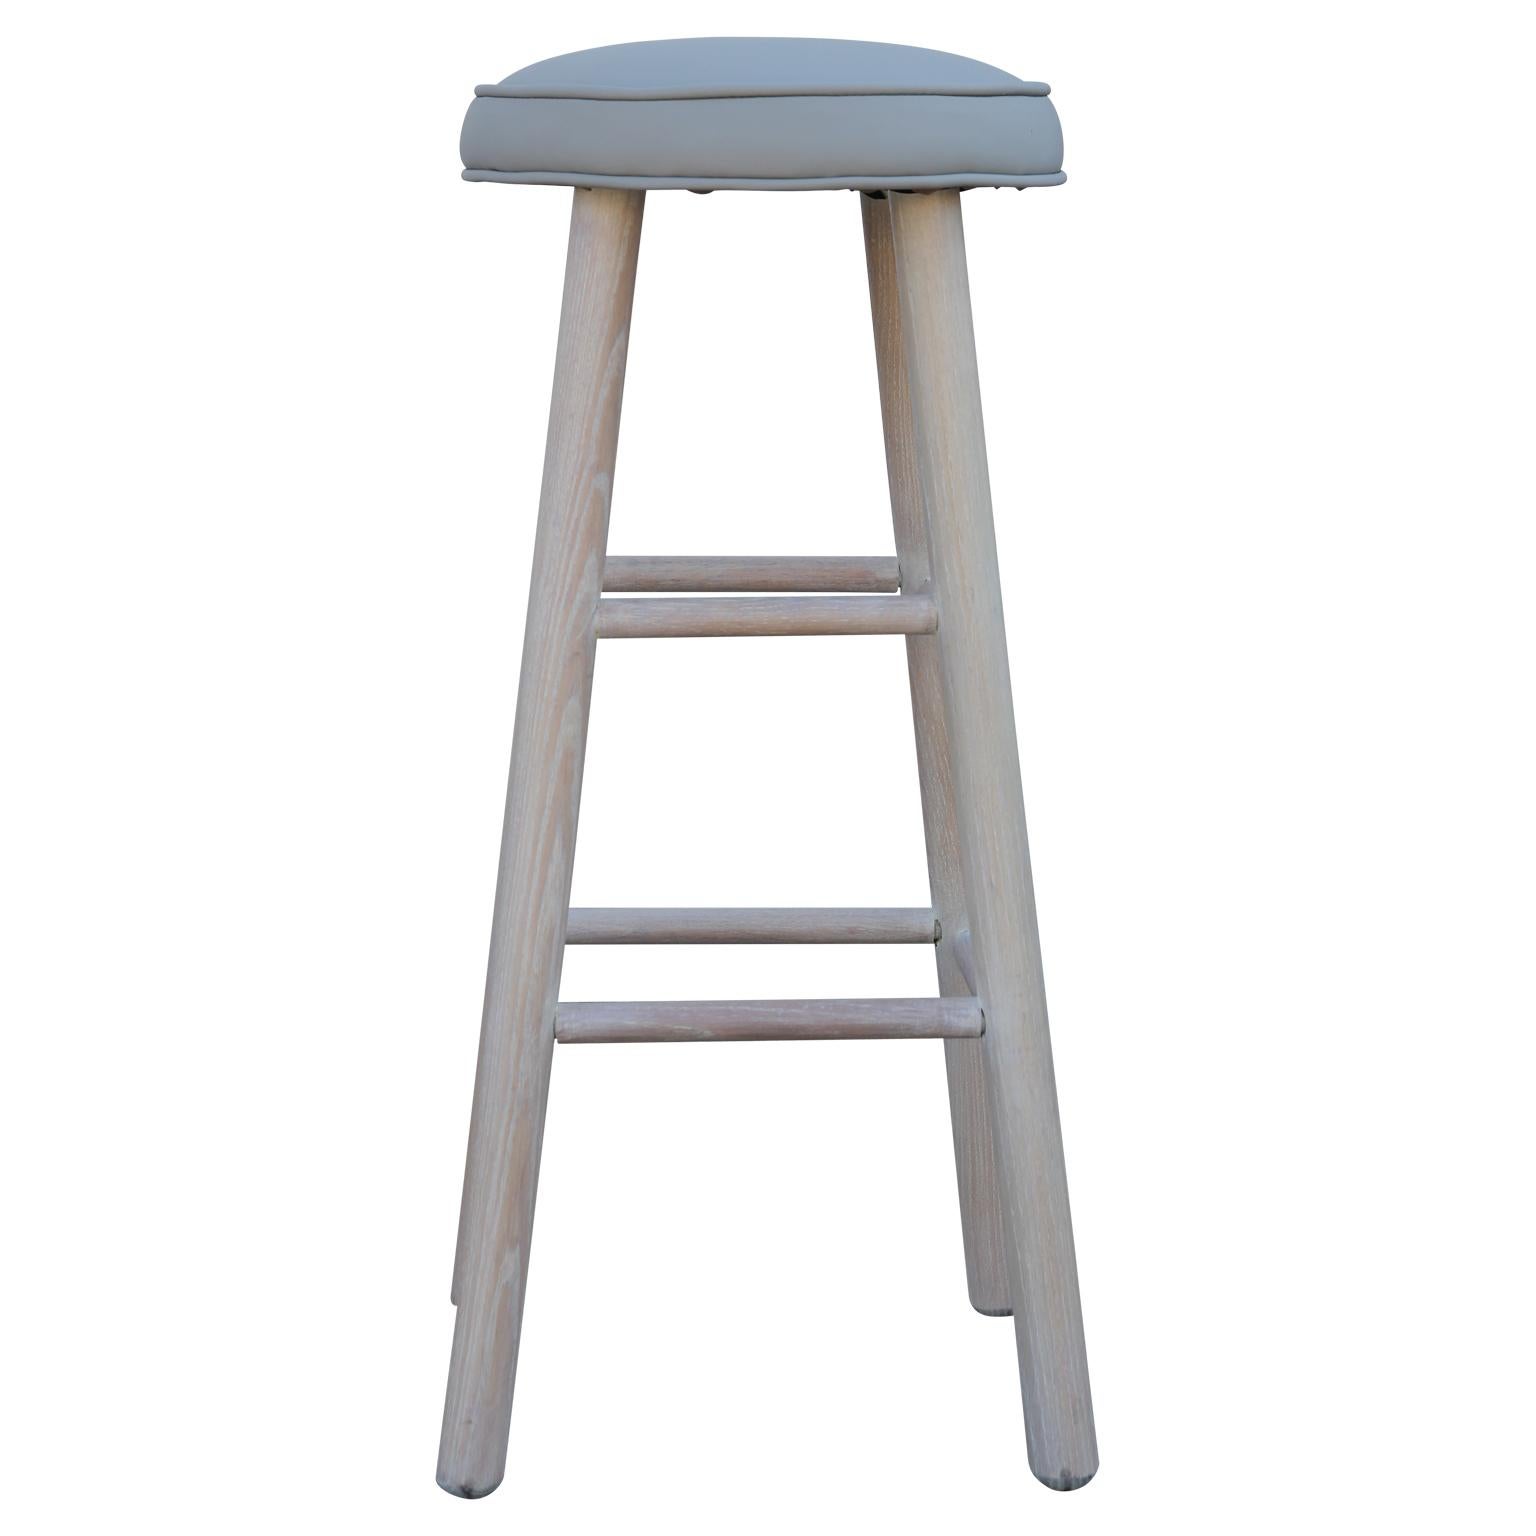 Set of 4 newly refinished barstools with light gray leather and a white washed oak base. Each chair has 2 sets of rungs for stability and support.